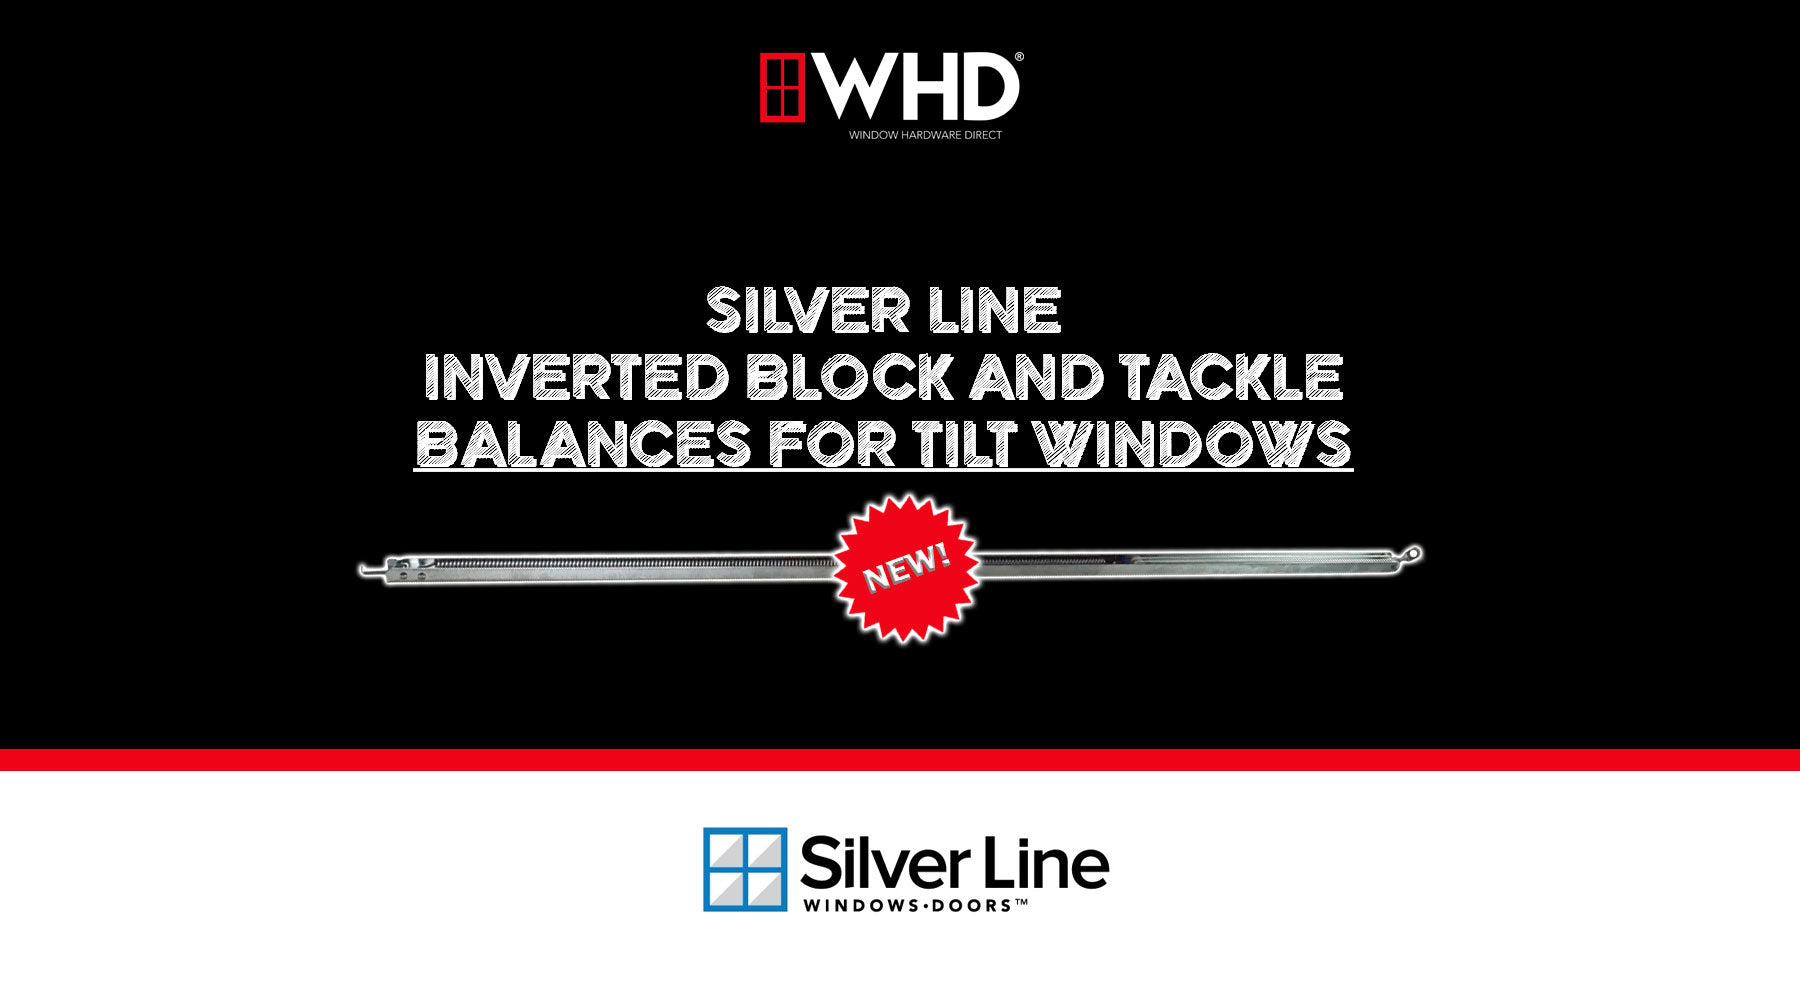 Introducing the Silver Line Inverted Block and Tackle Balance for Tilt Windows